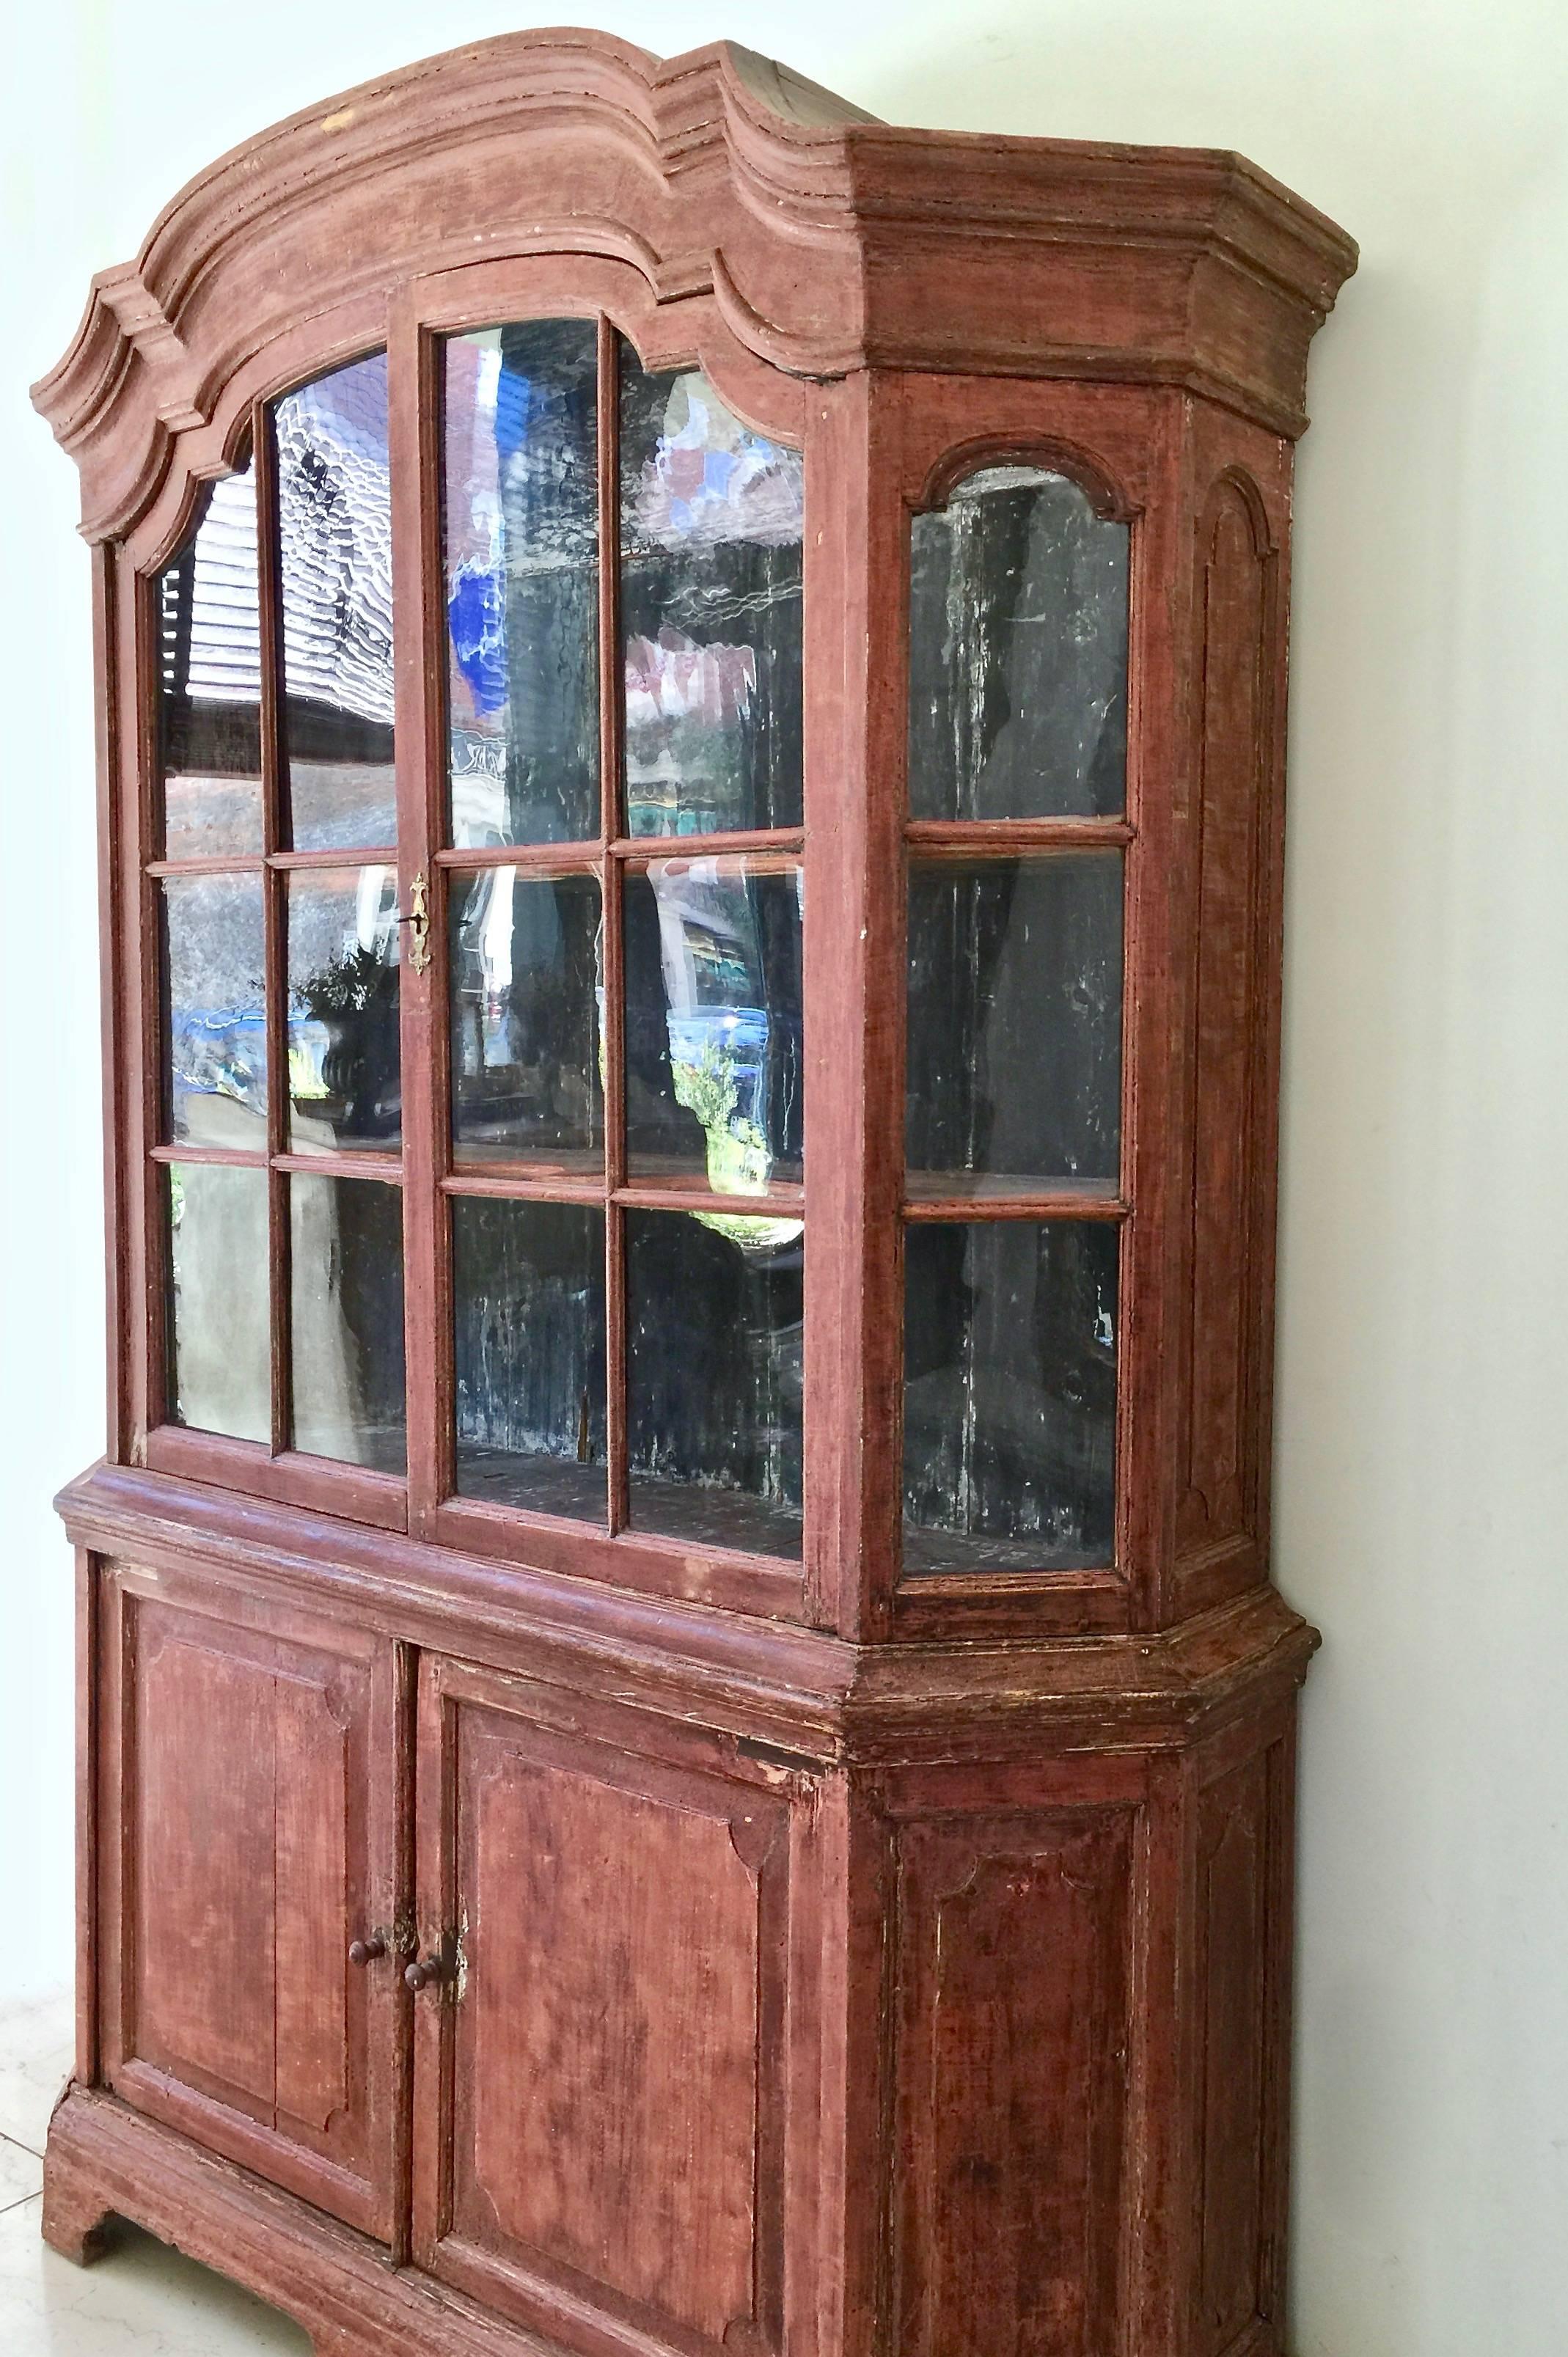 A very handsome 18th century Dutch cabinet vitrine in impressive scale with original handblown glass, scaped to most original patinated color, beautifully shaped/scalloped interior shelves, arched pediment cornice and panelled doors.